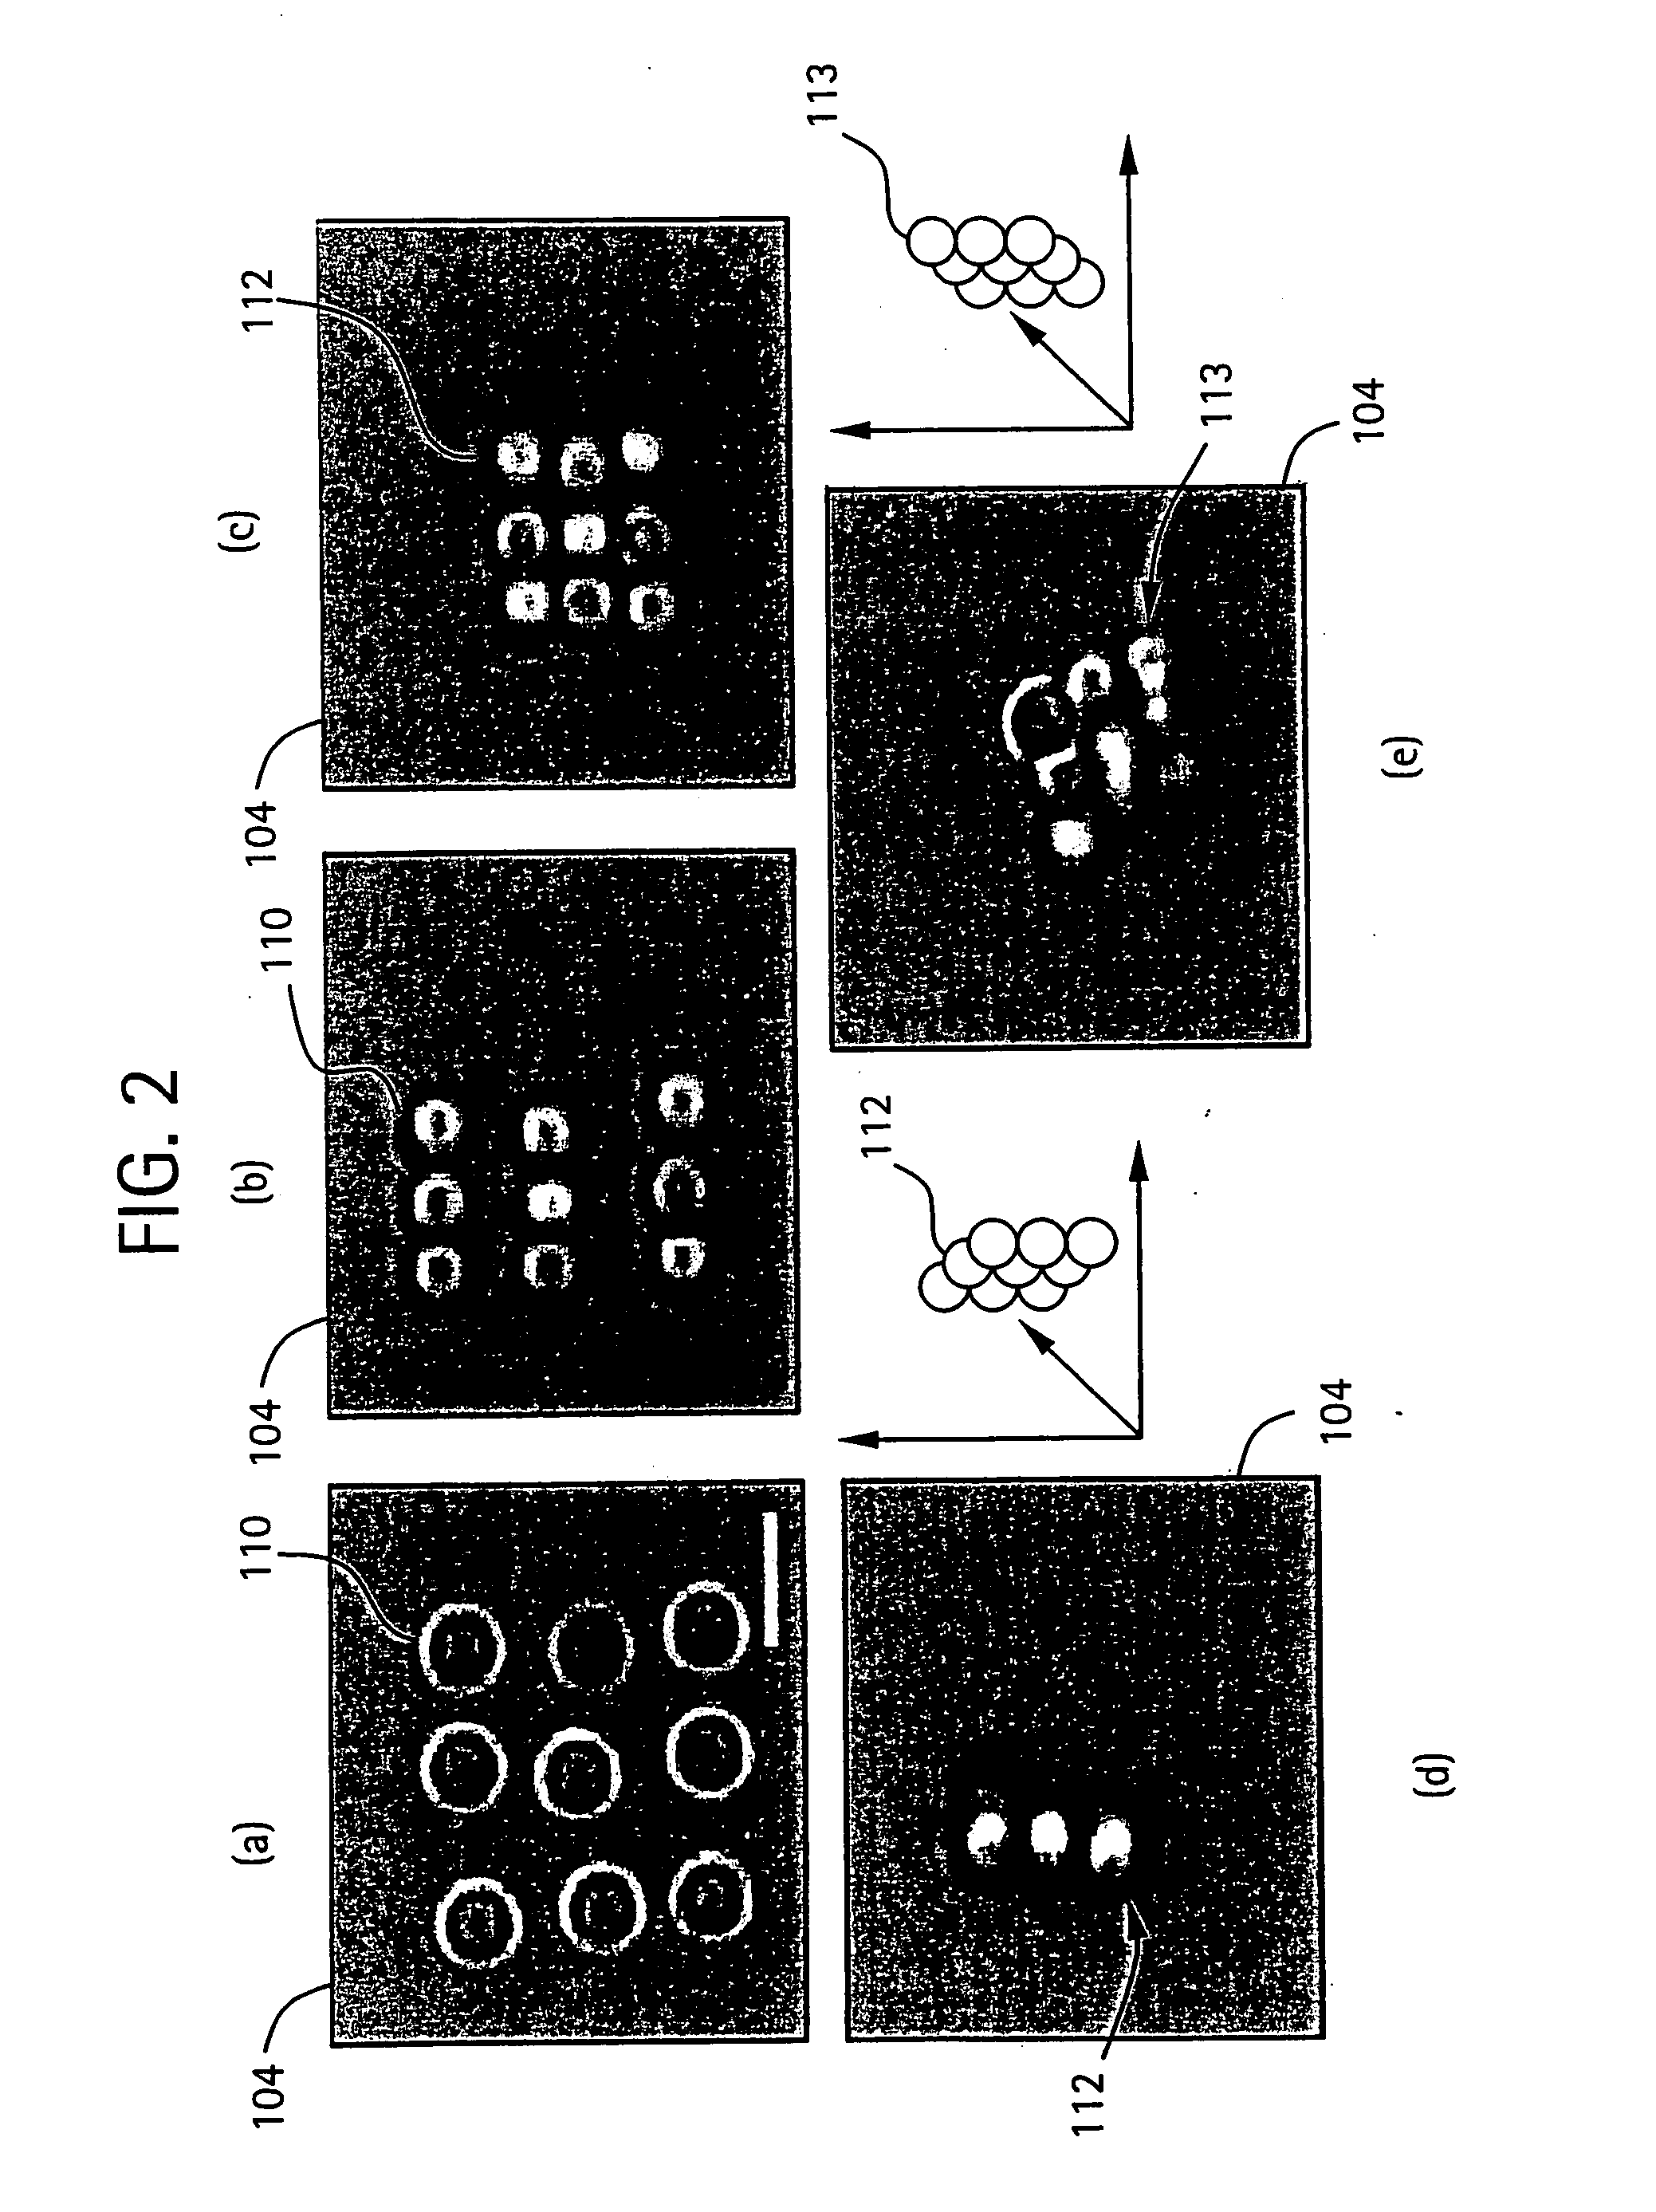 Method and apparatus for forming multi-dimensional colloidal structures using holographic optical tweezers